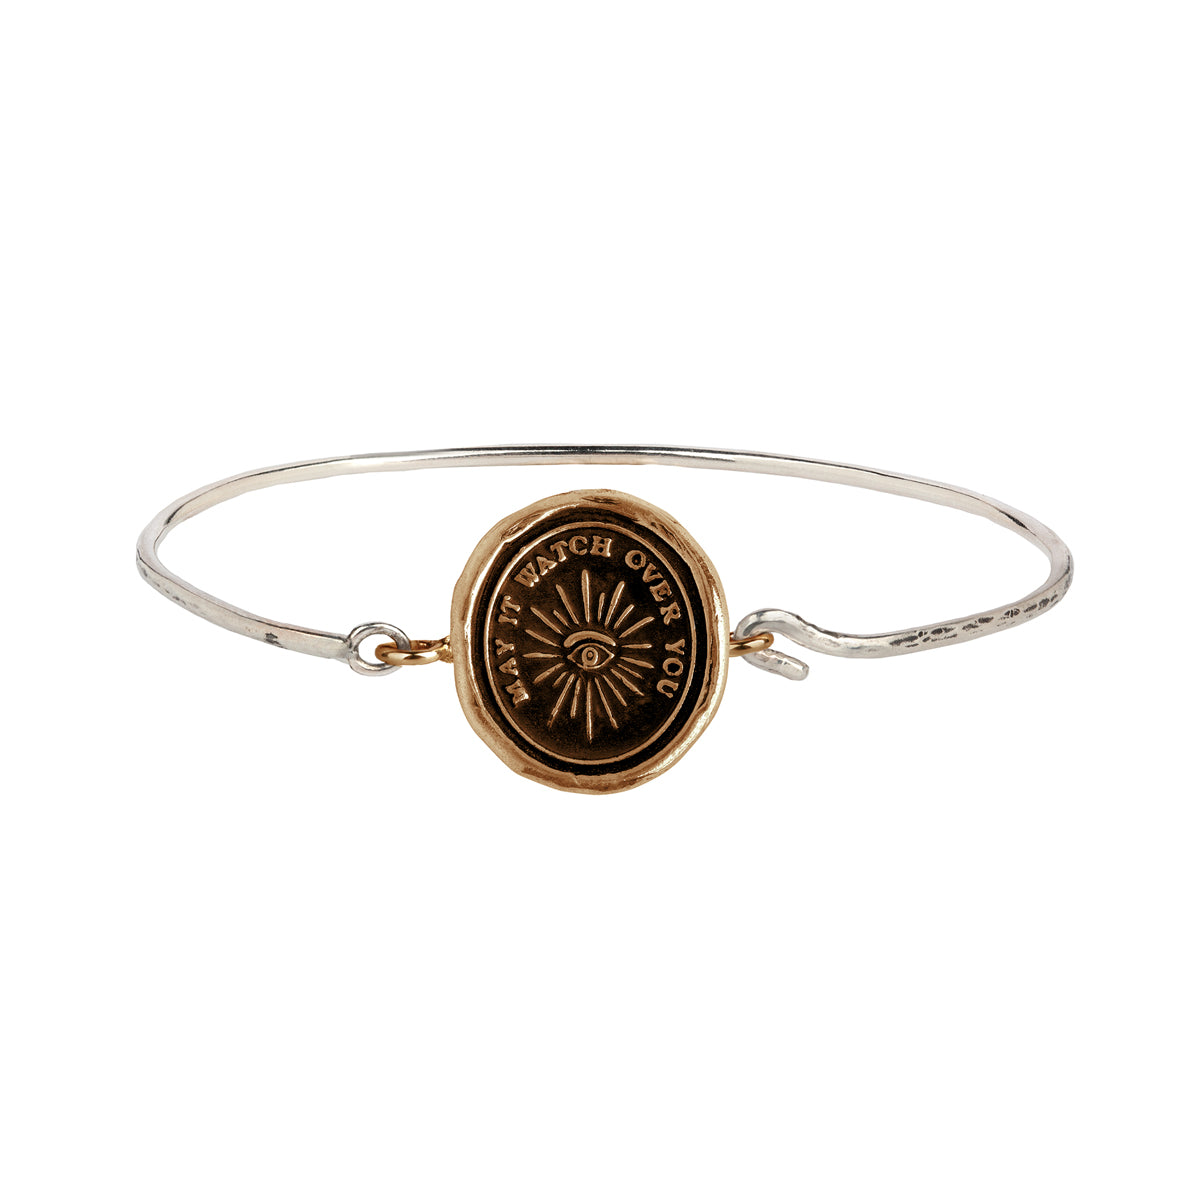 A hard sterling silver band fastened with a hook and eye clasp featuring our bronze Higher Power talisman.